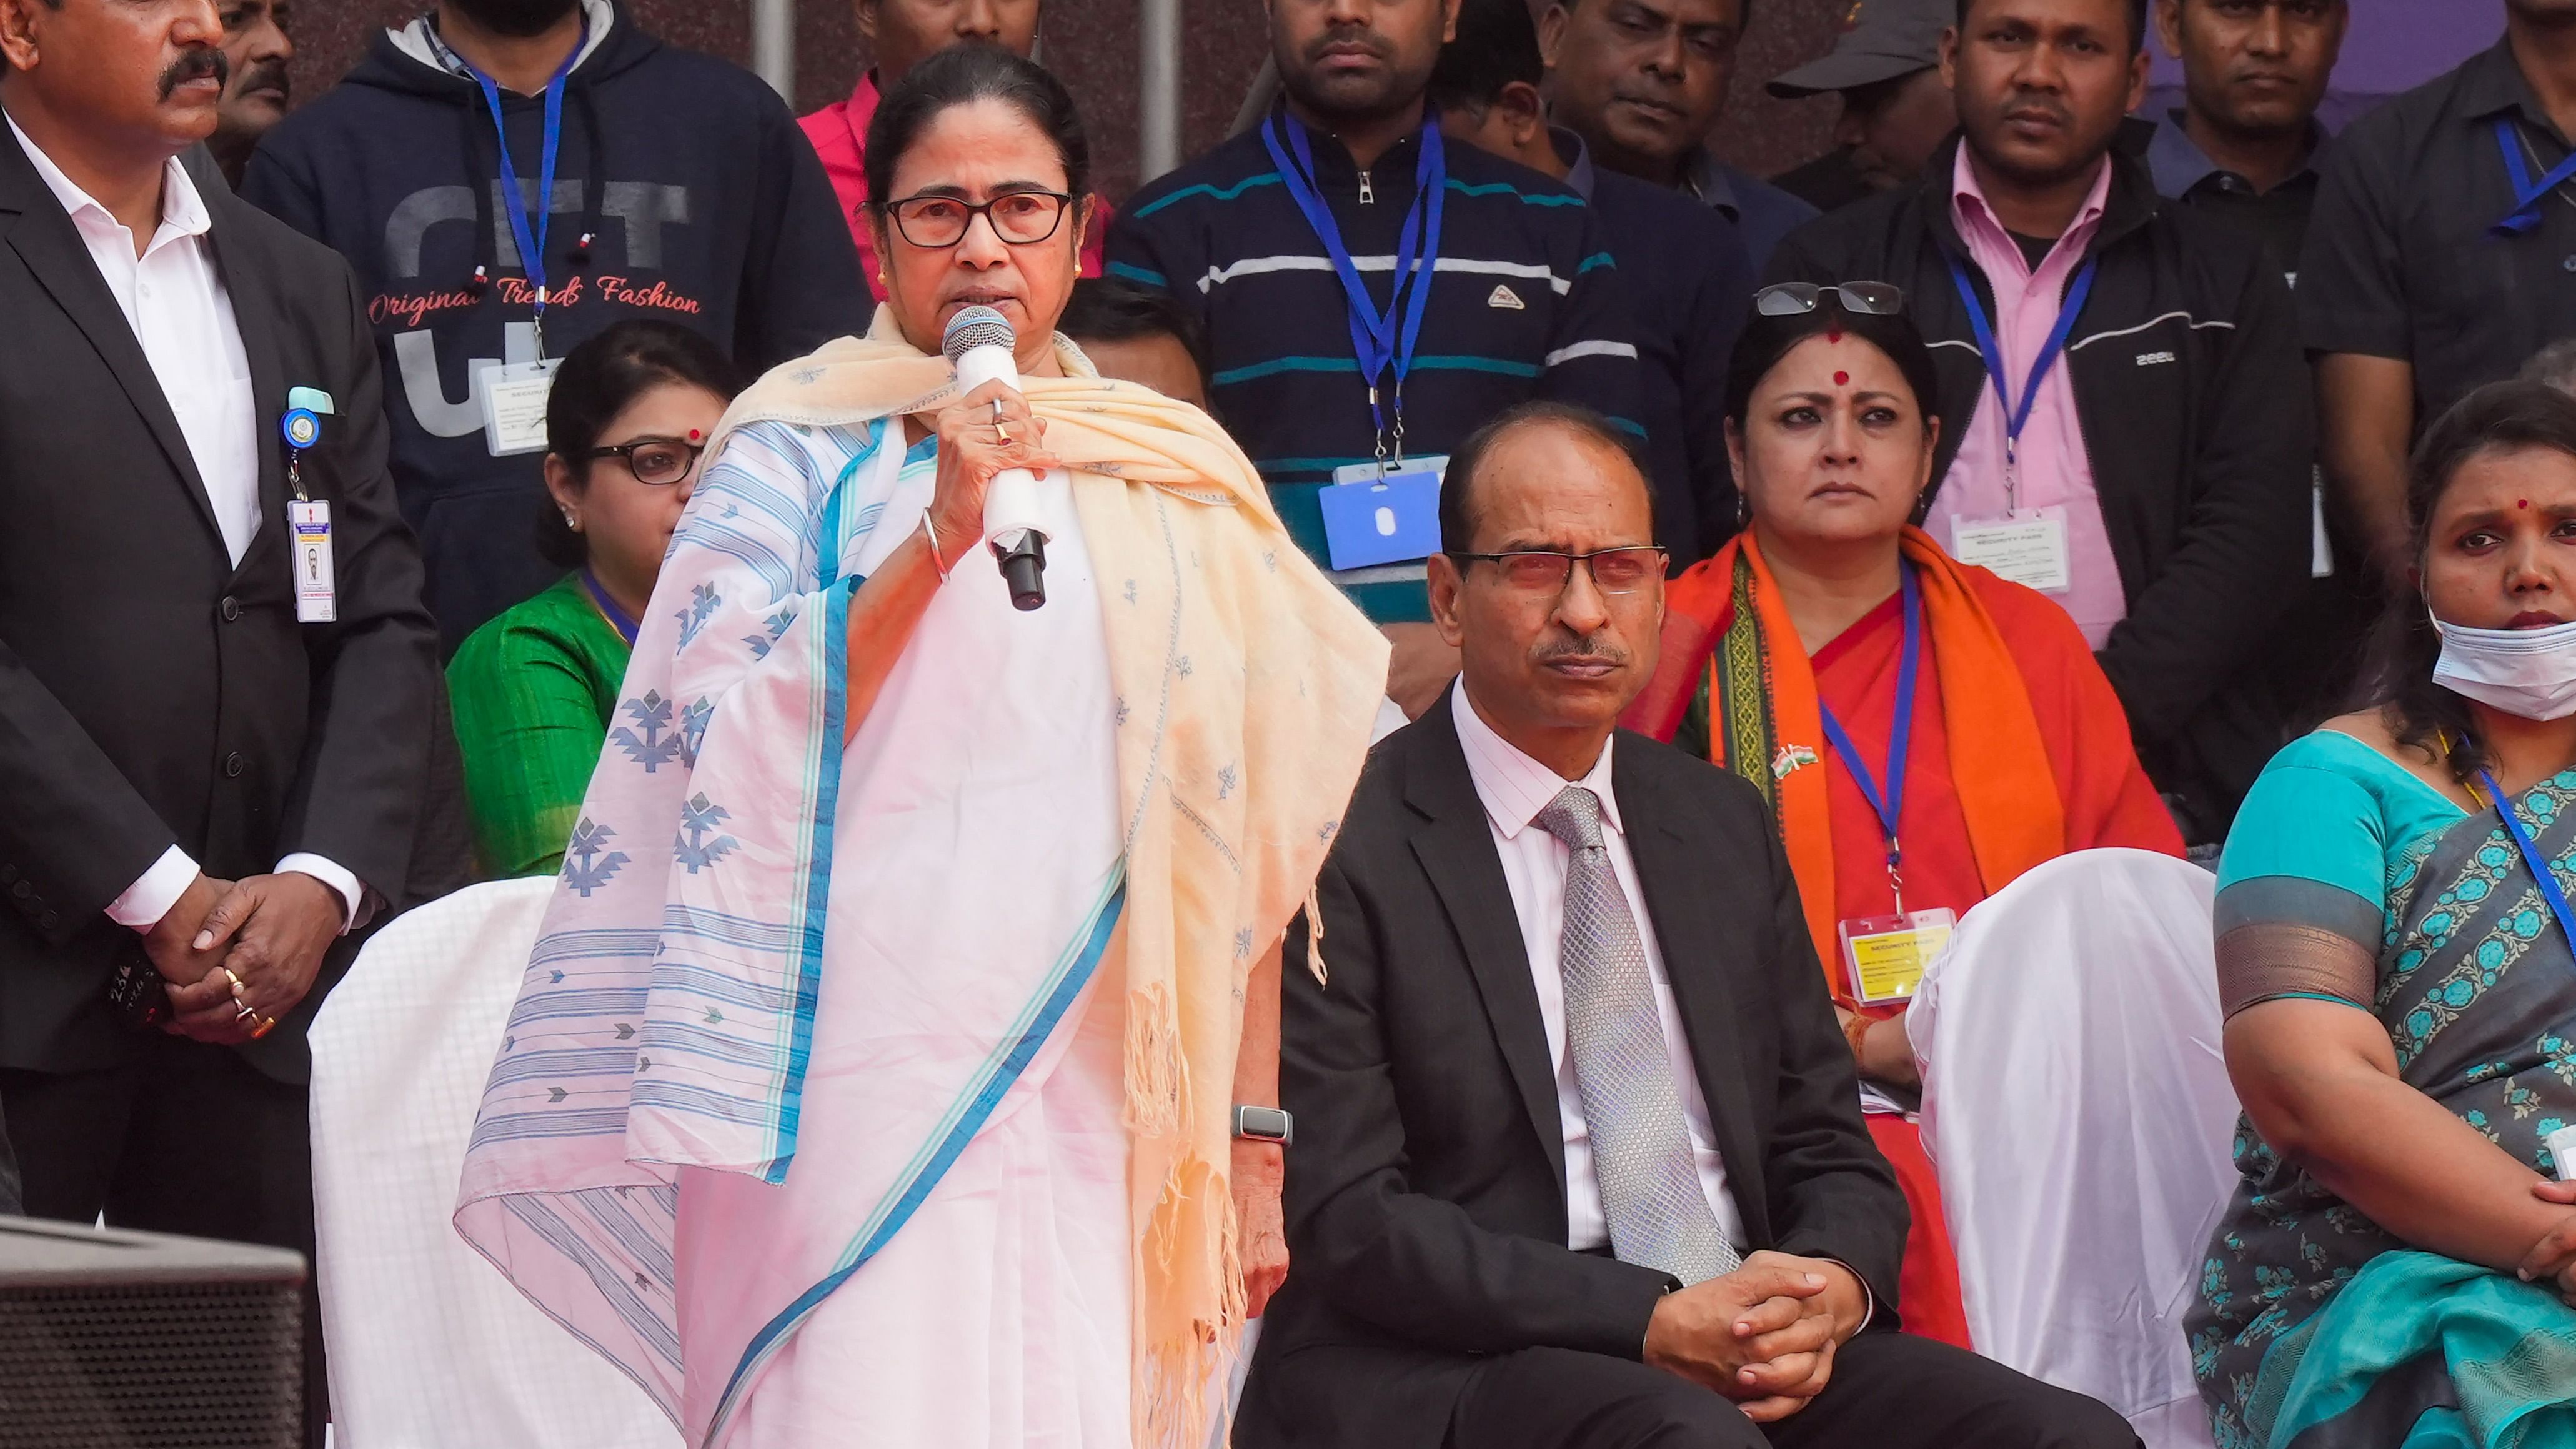 Mamata Banerjee speaks during the flagging off ceremony of Vande Bharat Express train. Credit: PTI Photo